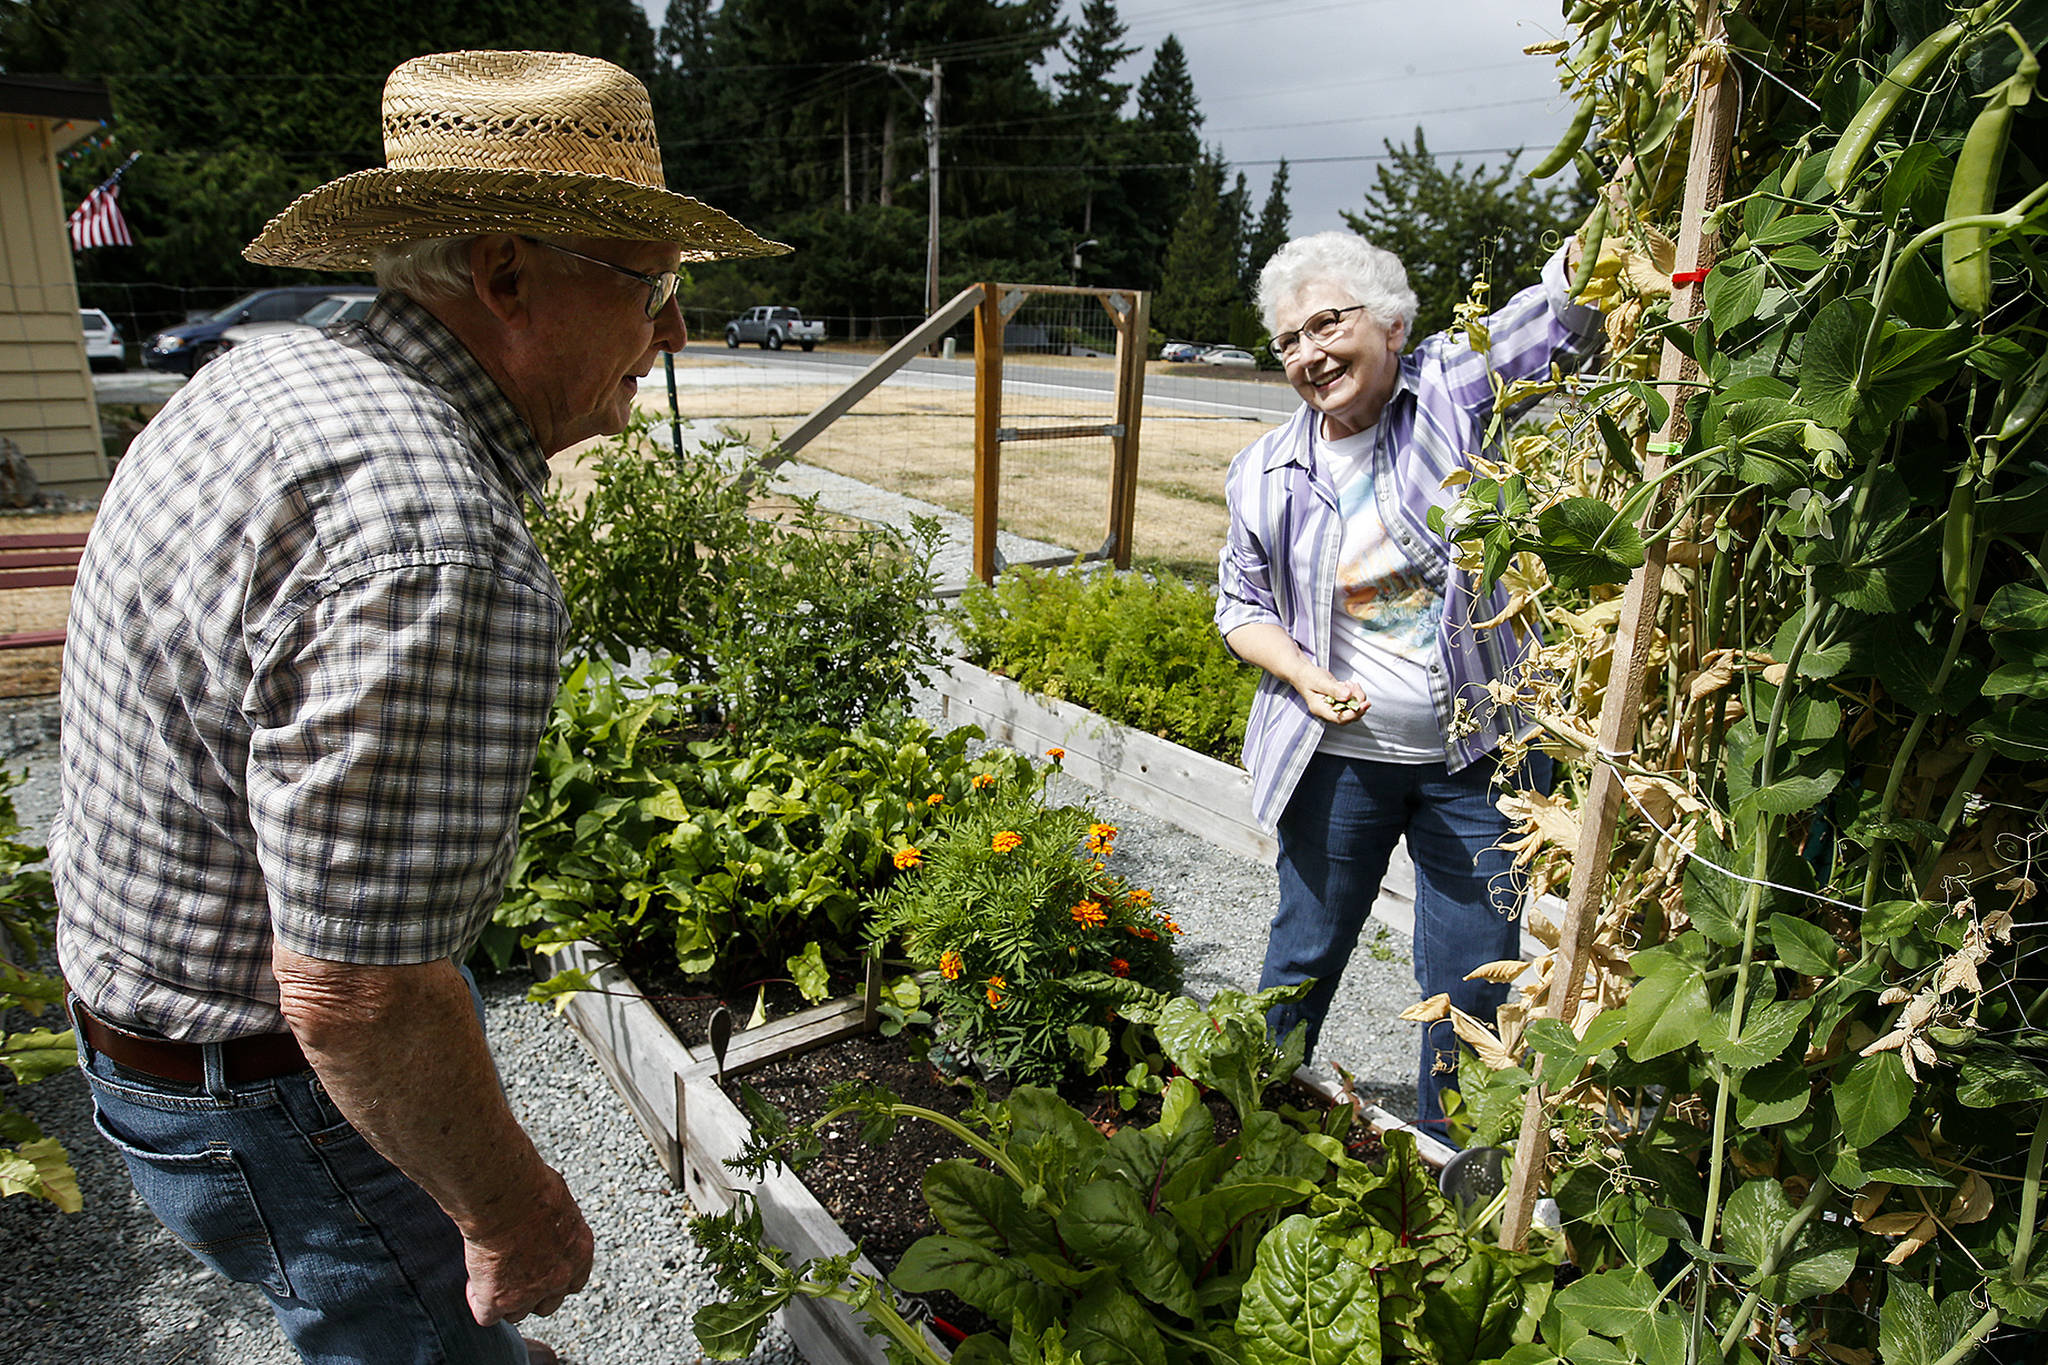 Joan and Hank Husby harvest their tall peas in the Warm Beach community garden in Stanwood on July 20. (Ian Terry / The Herald)